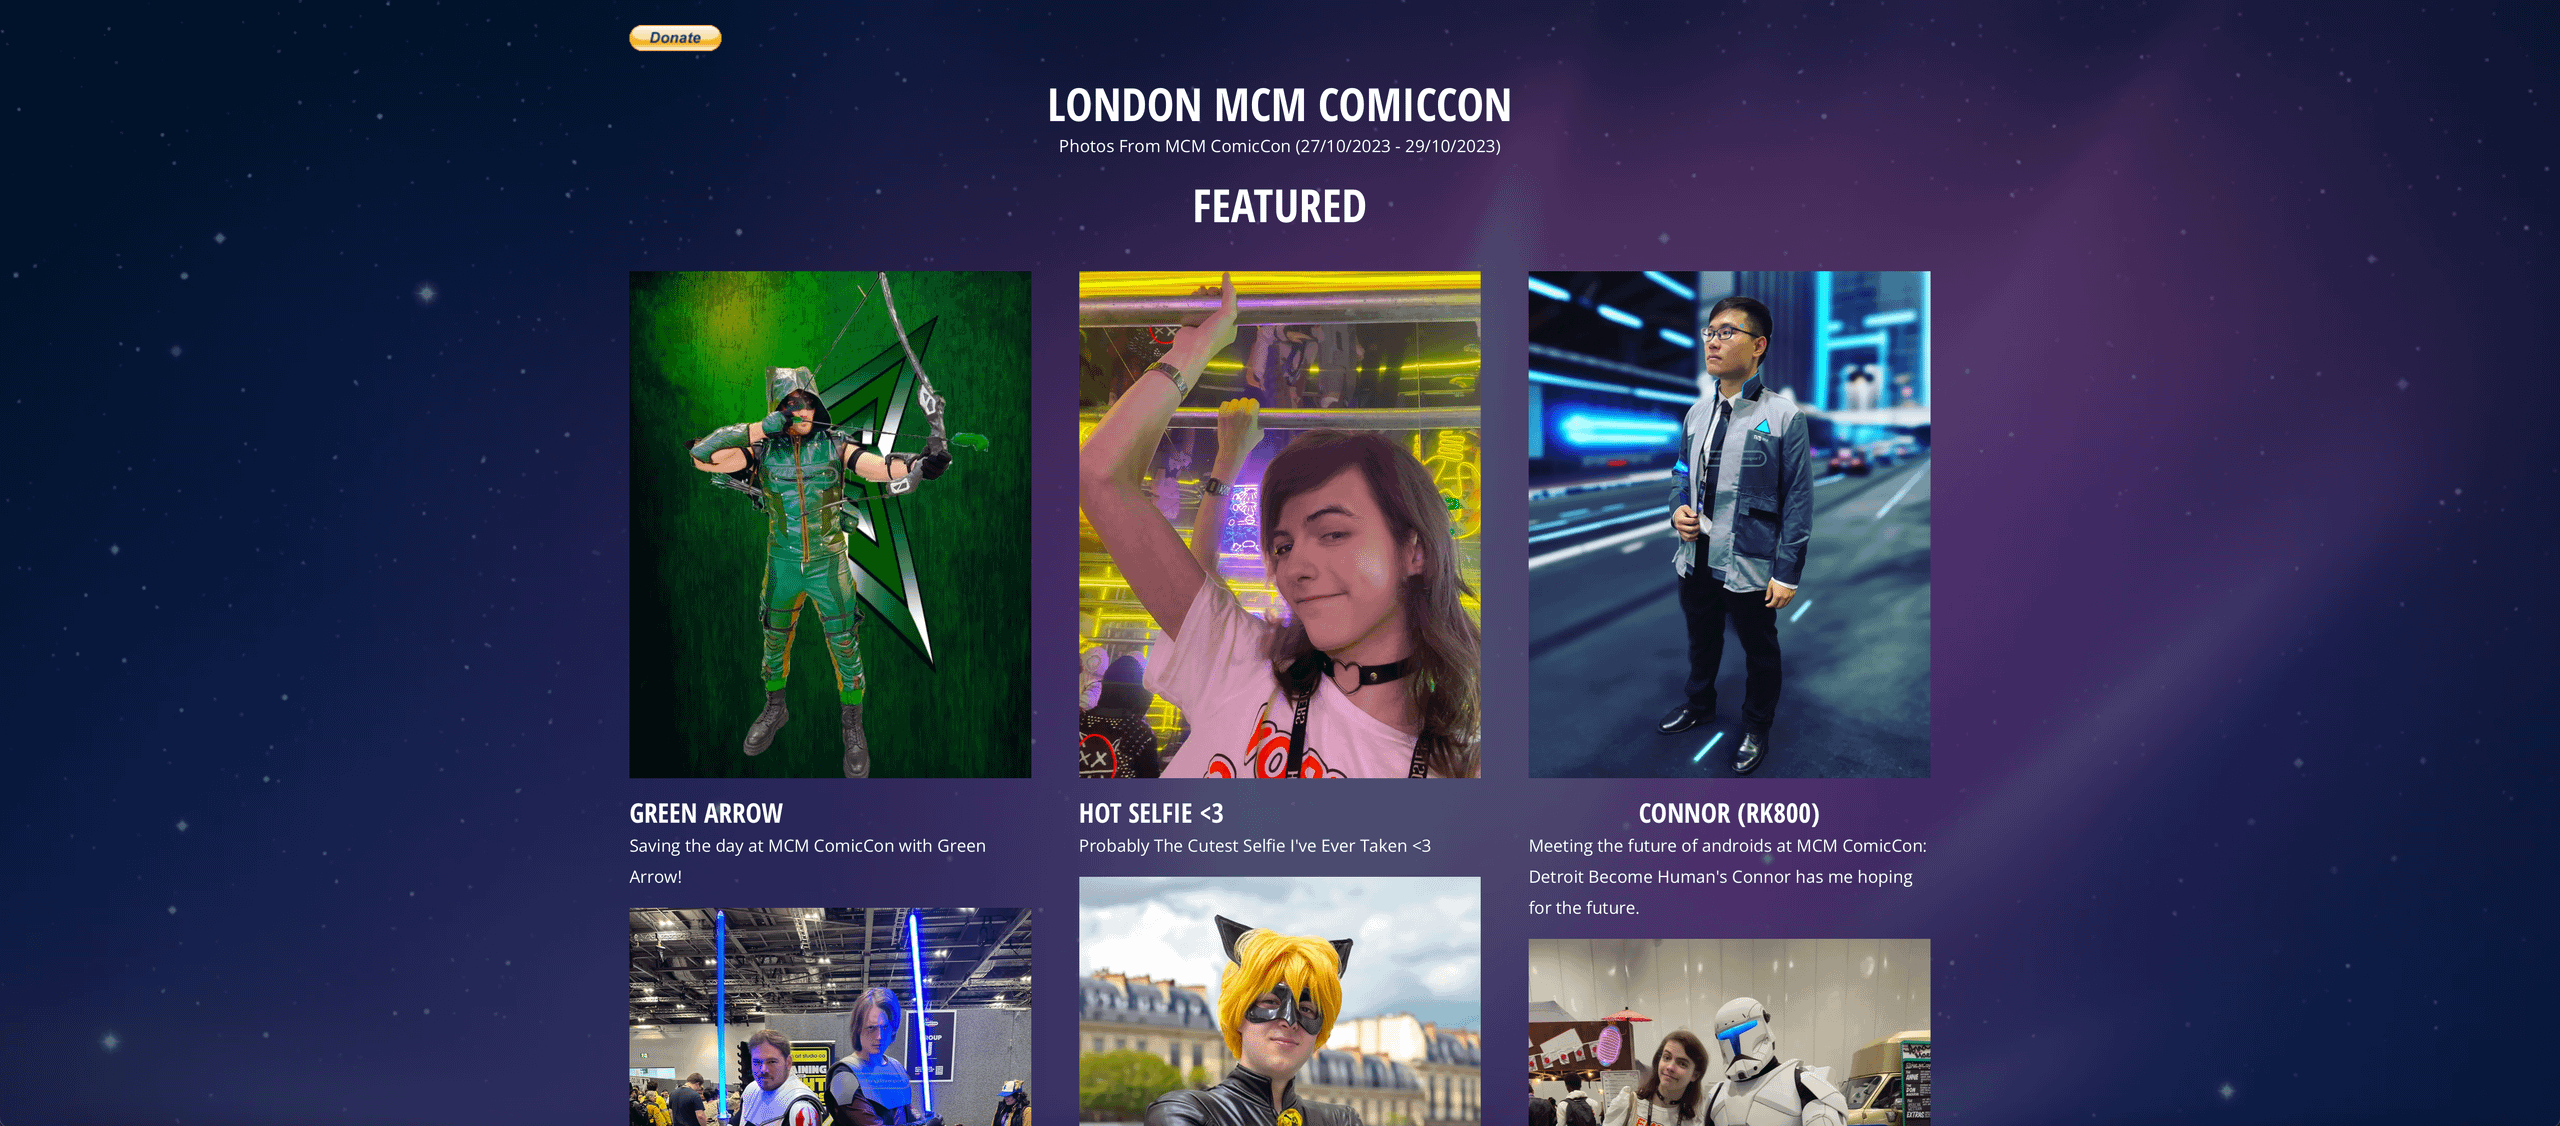 London MCM ComicCon (October) Page - Now Live